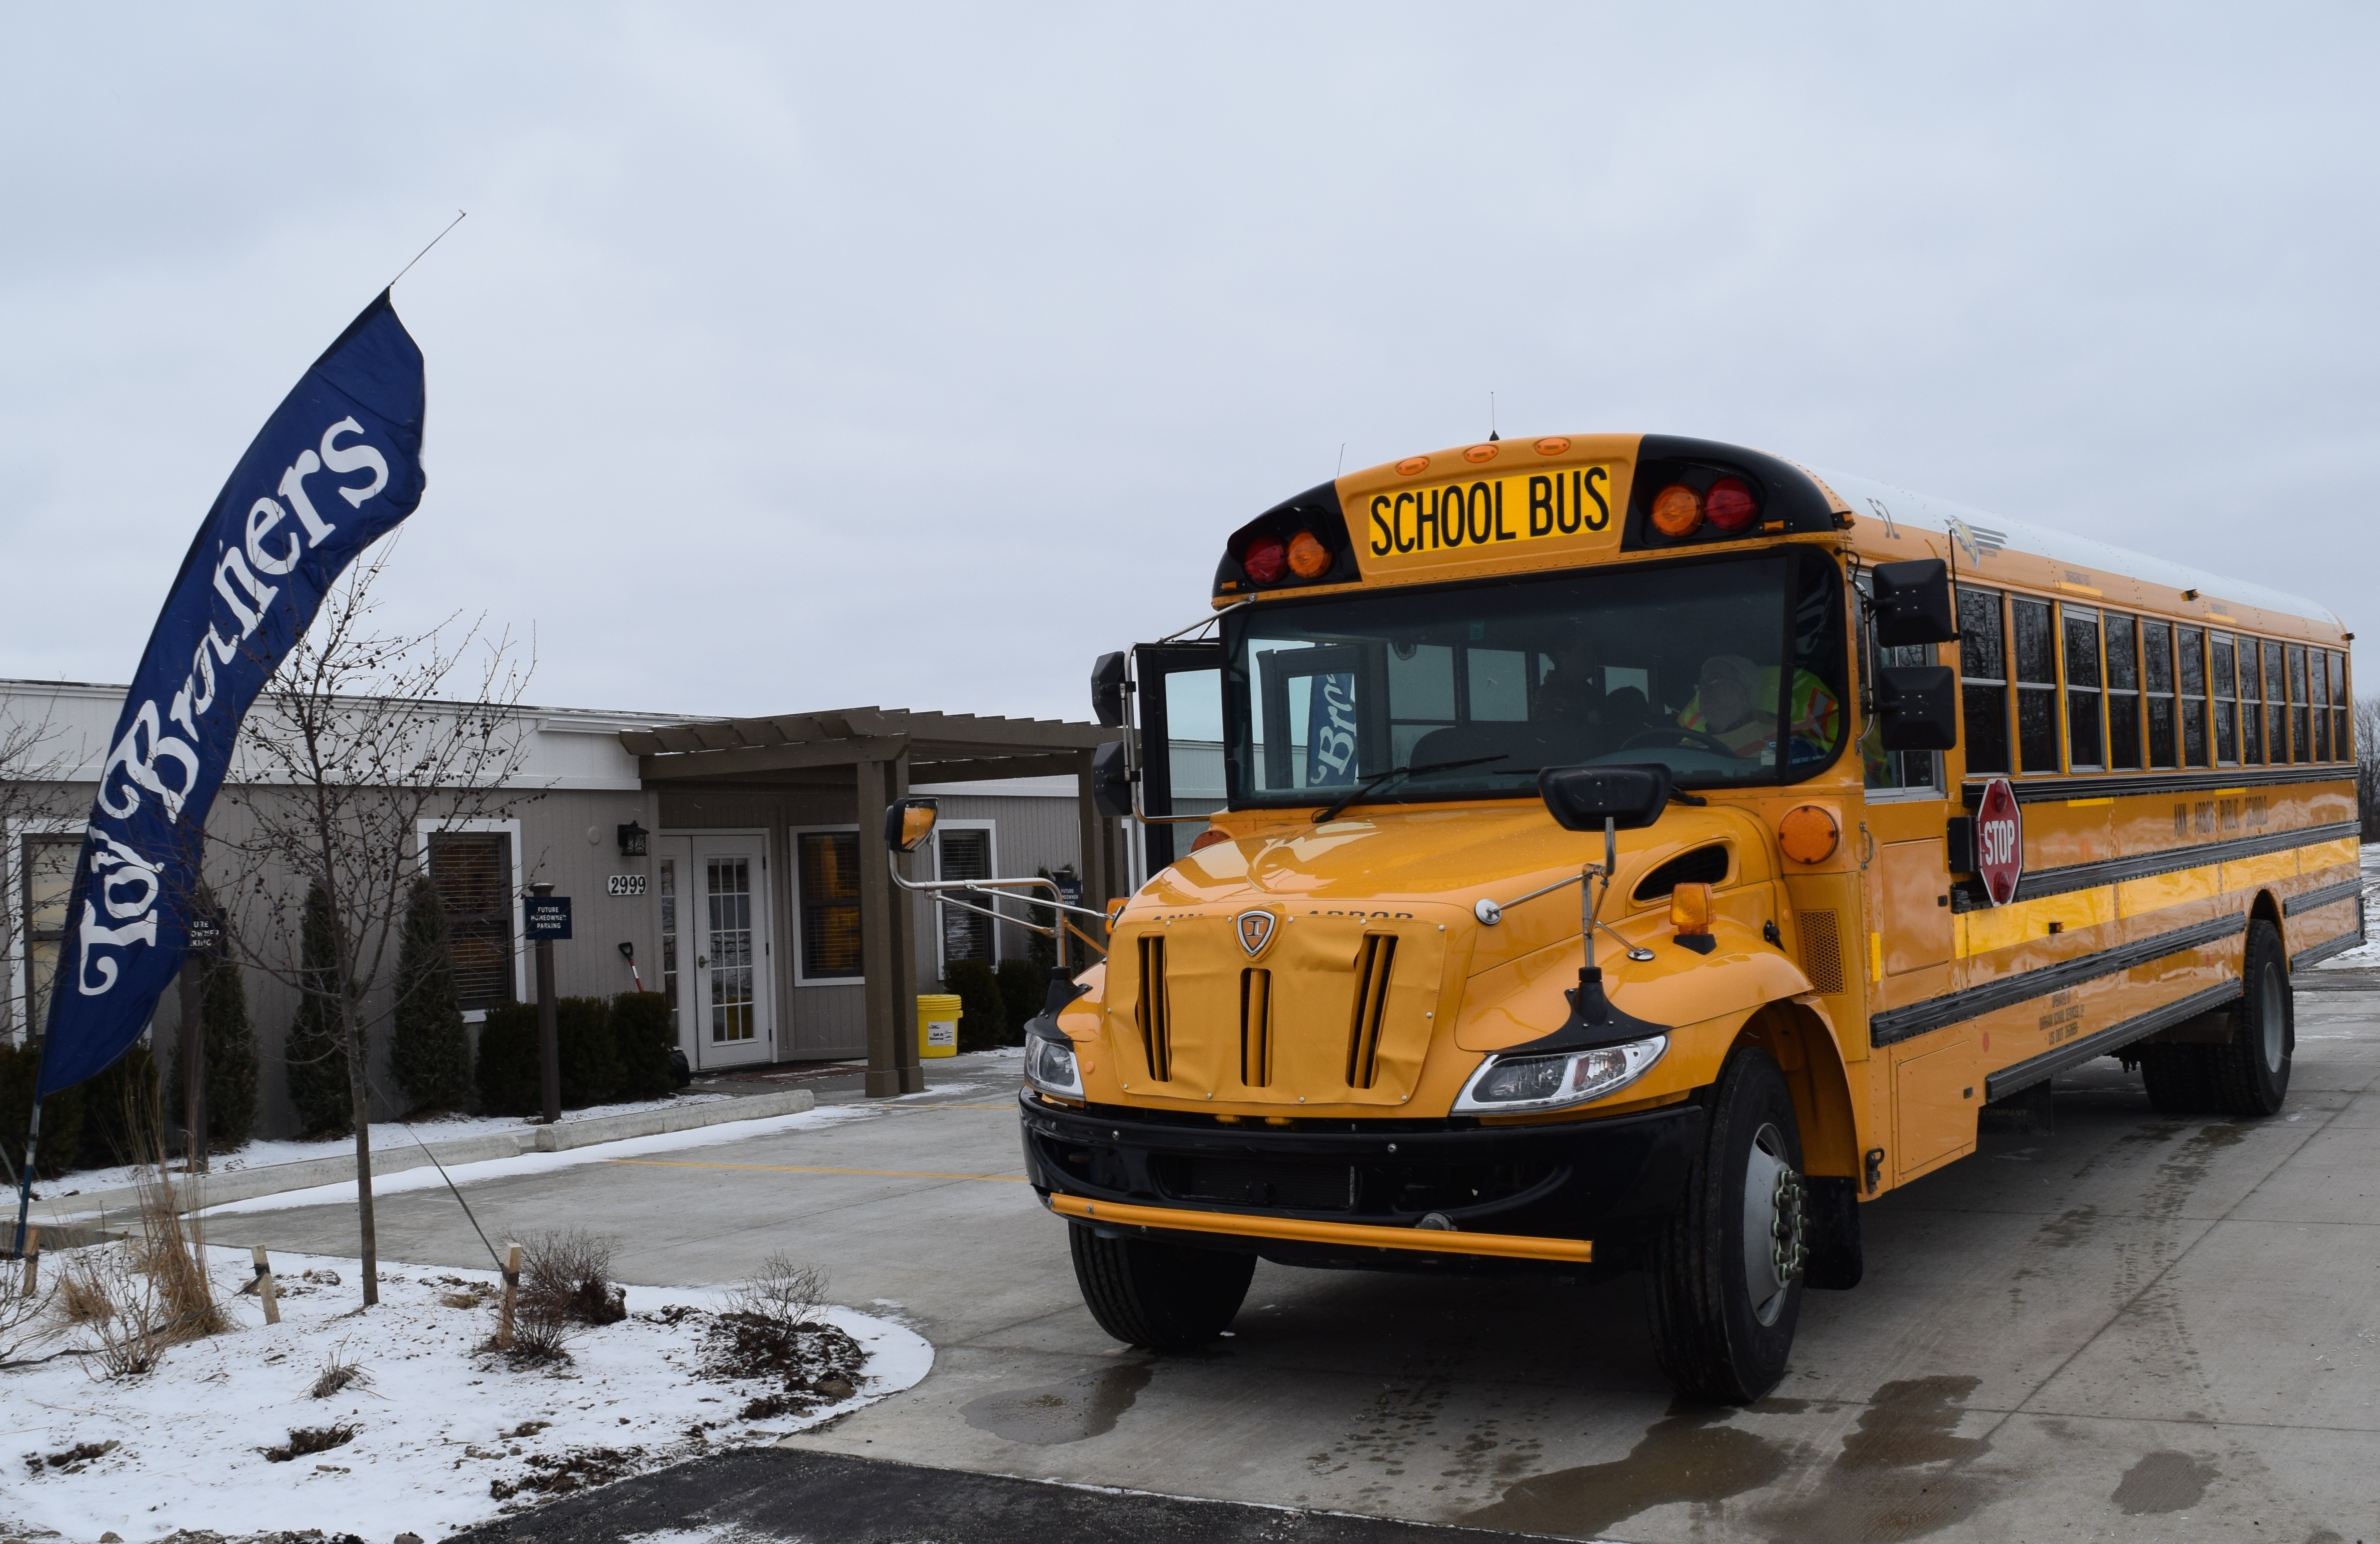 Ann Arbor Public Schools bus in front of Toll Brothers sales office for North Oaks development